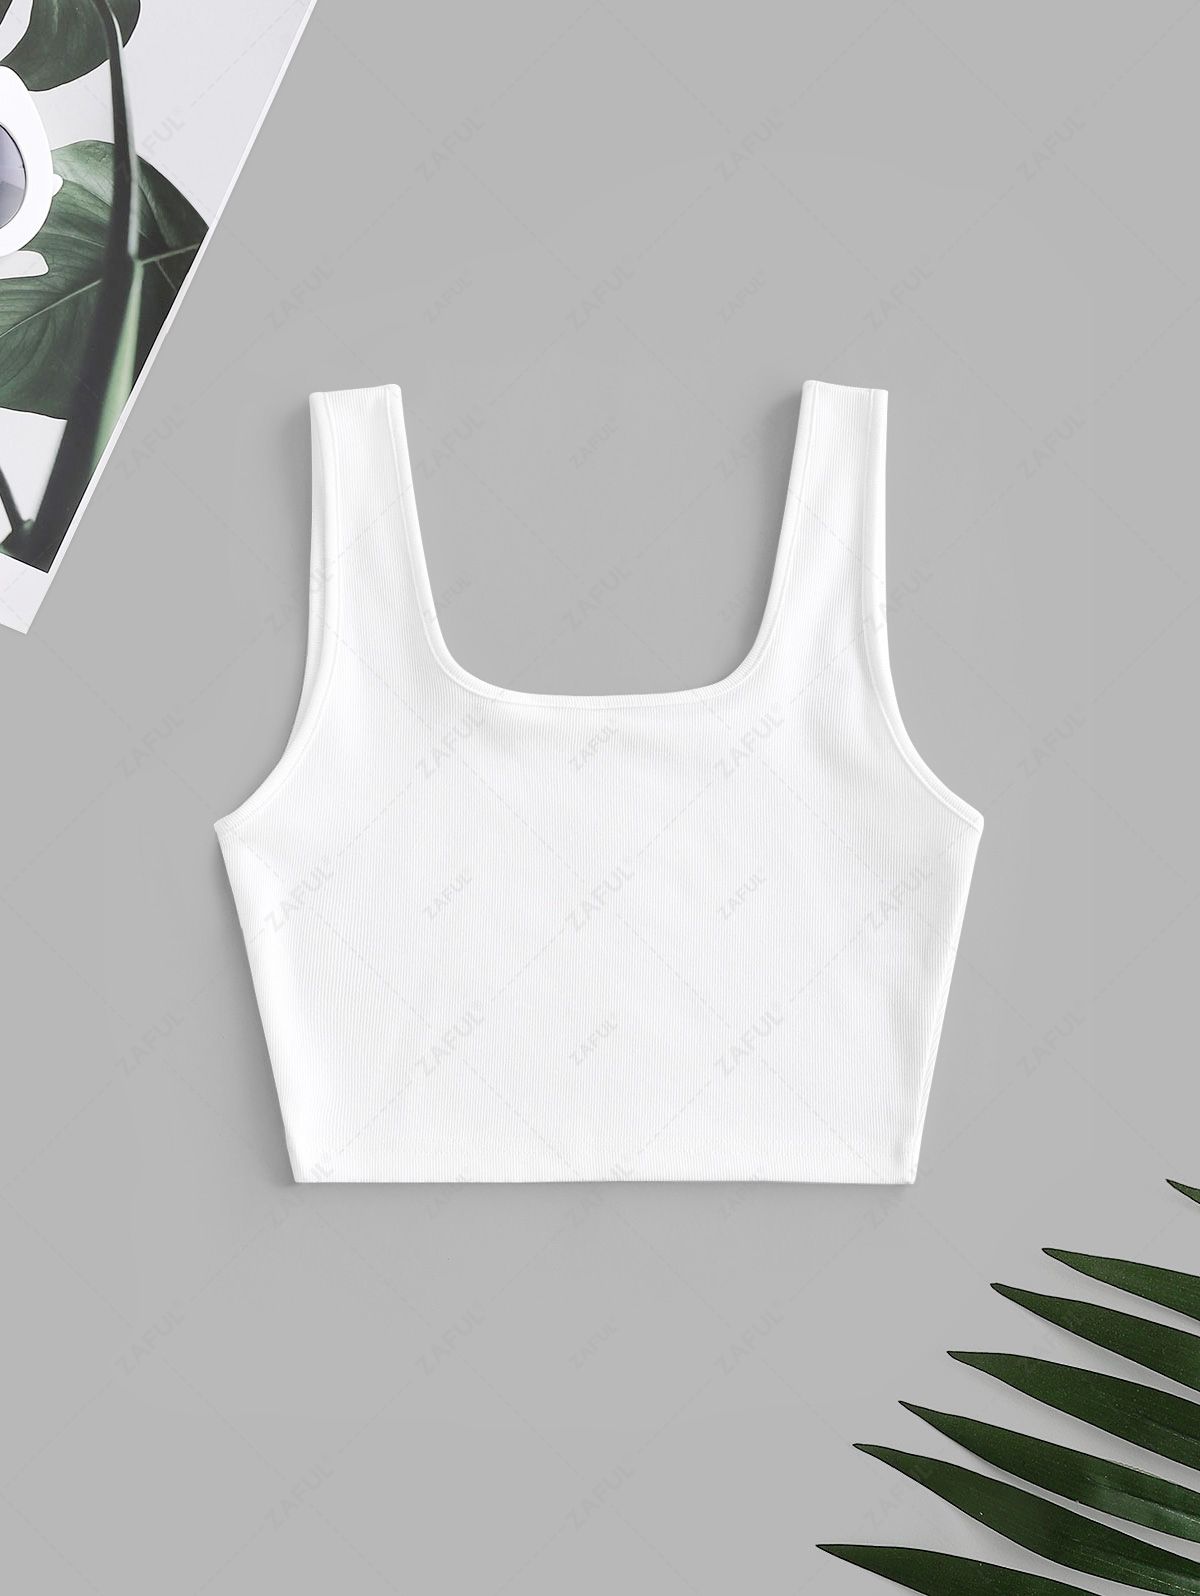 Sleeveless Essential Plain Ribbed Cropped Tops Basic Summer Versatile Tank Top